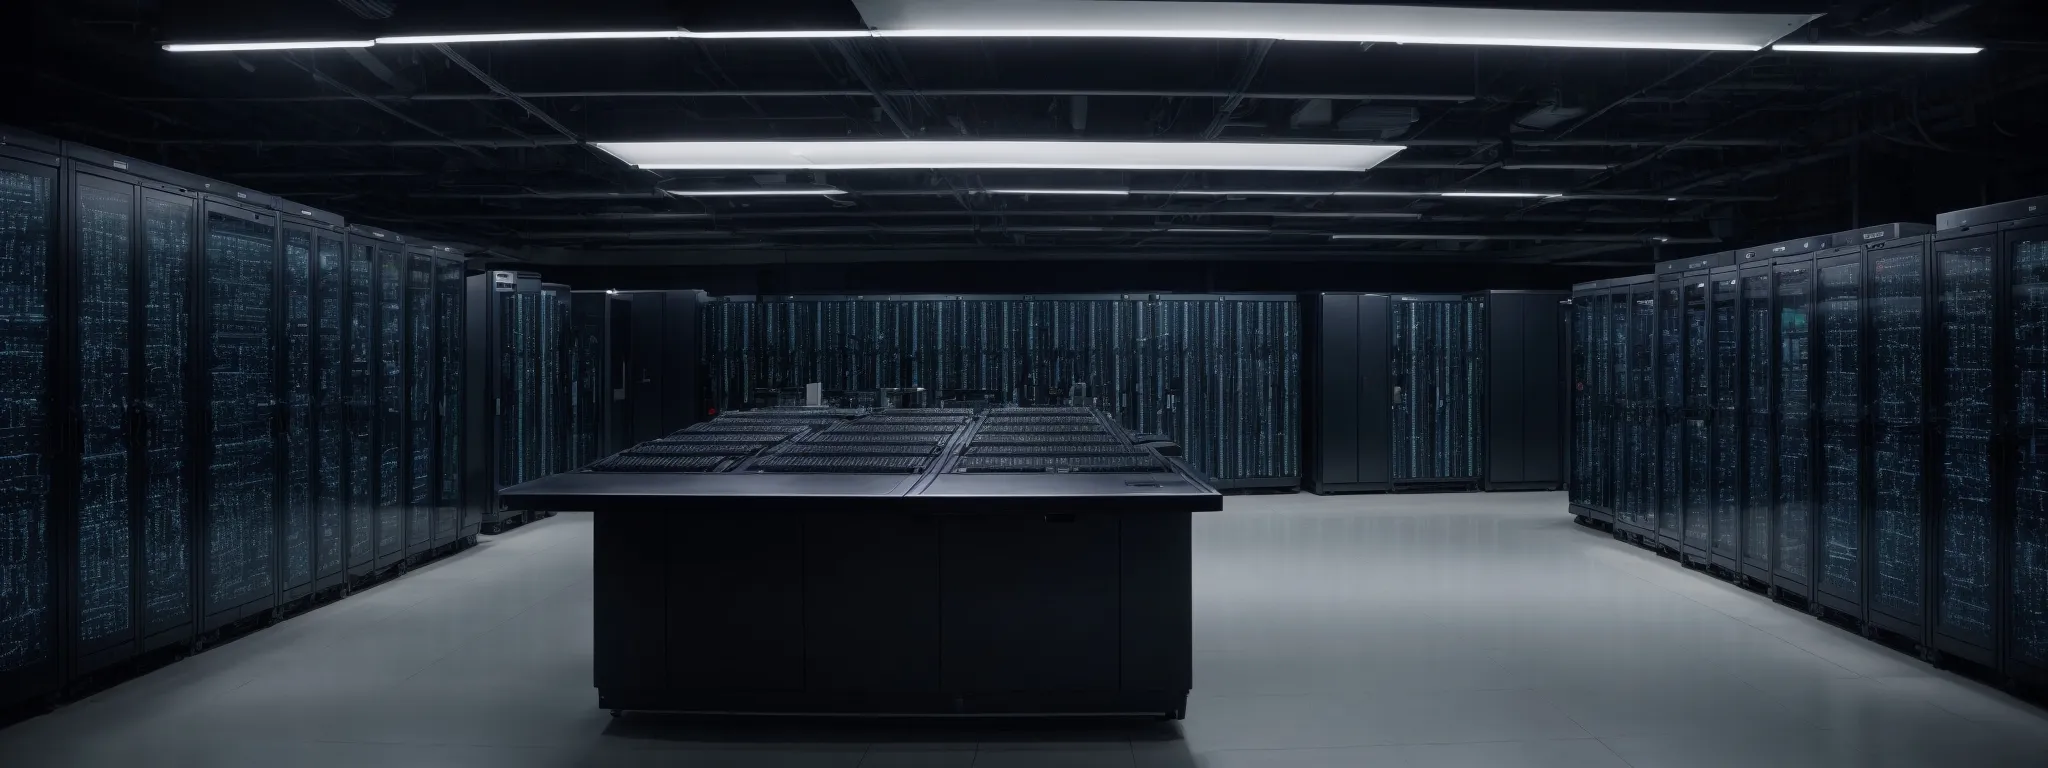 a server room with rows of high-tech equipment indicating advanced data processing and storage capabilities.